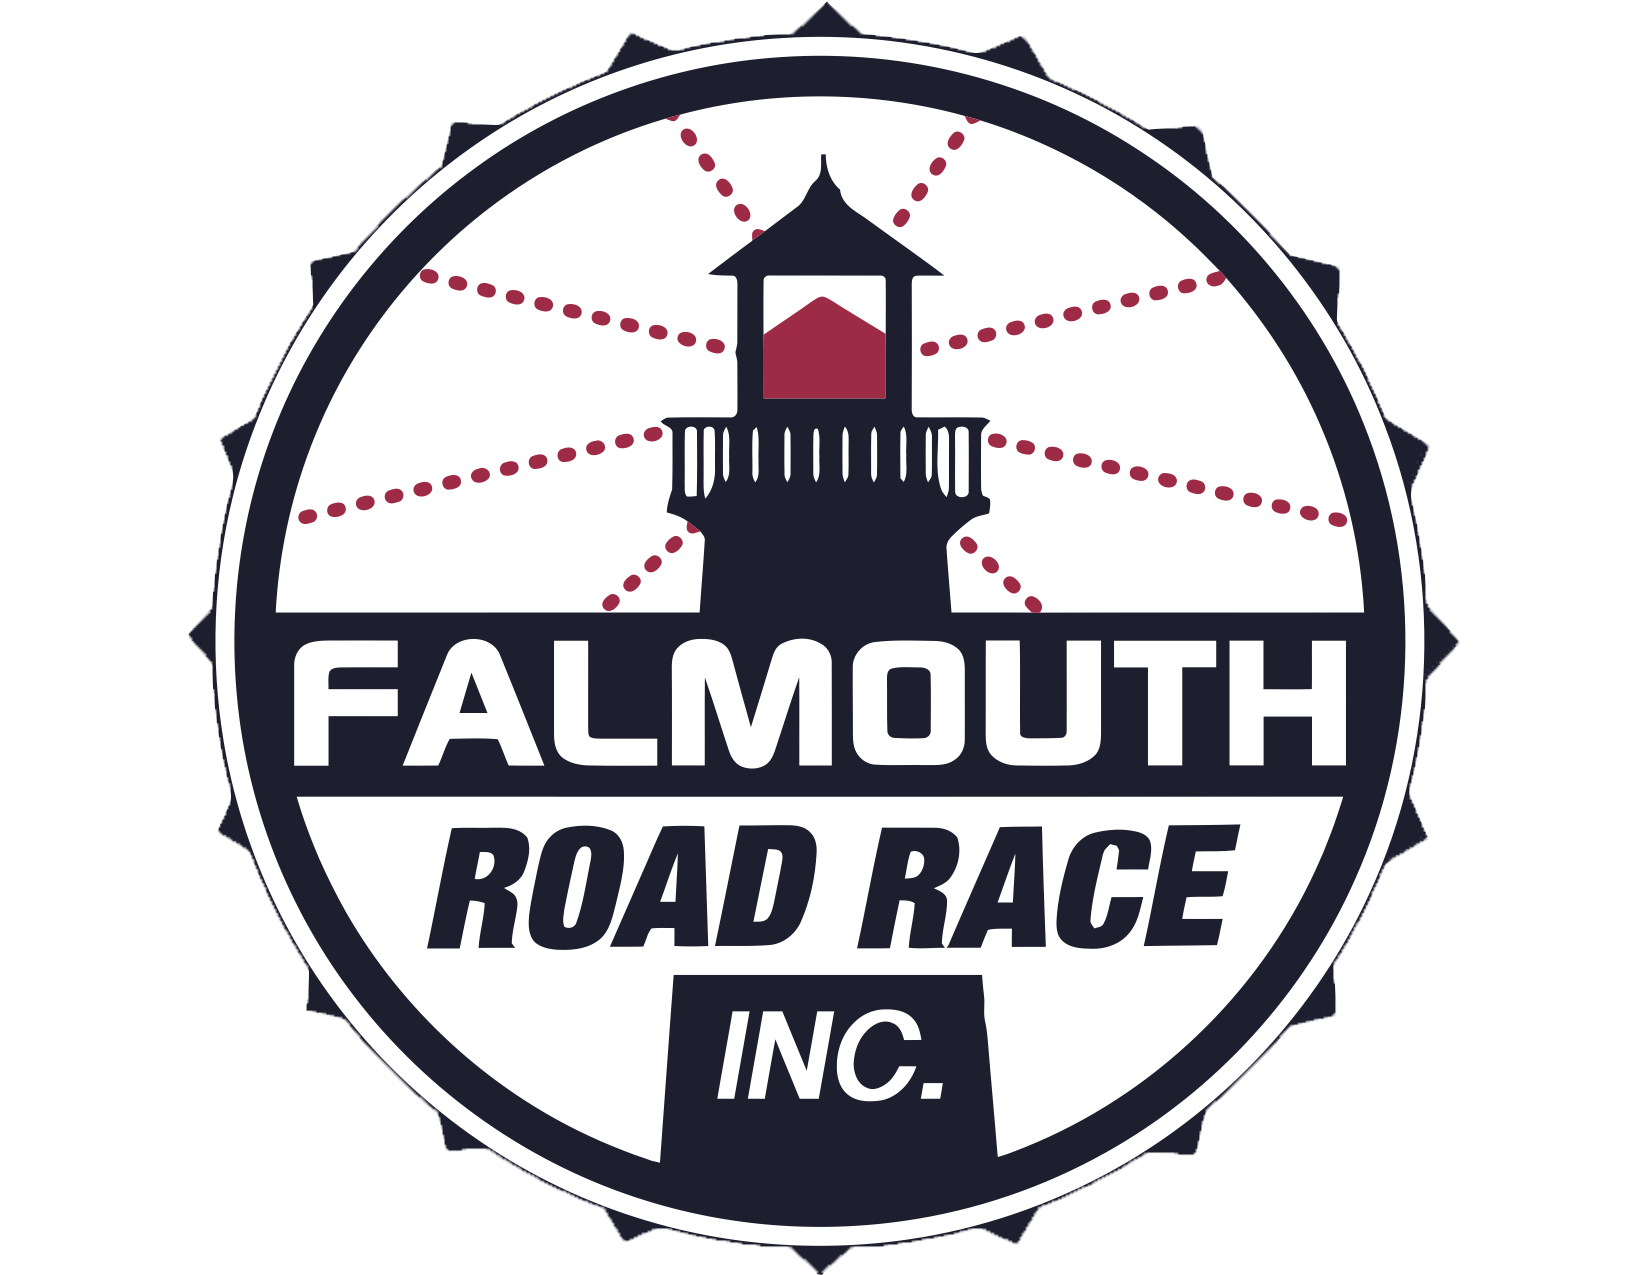 Falmouth Road Race, Inc. Awards Scholarships to 47 Recent Falmouth